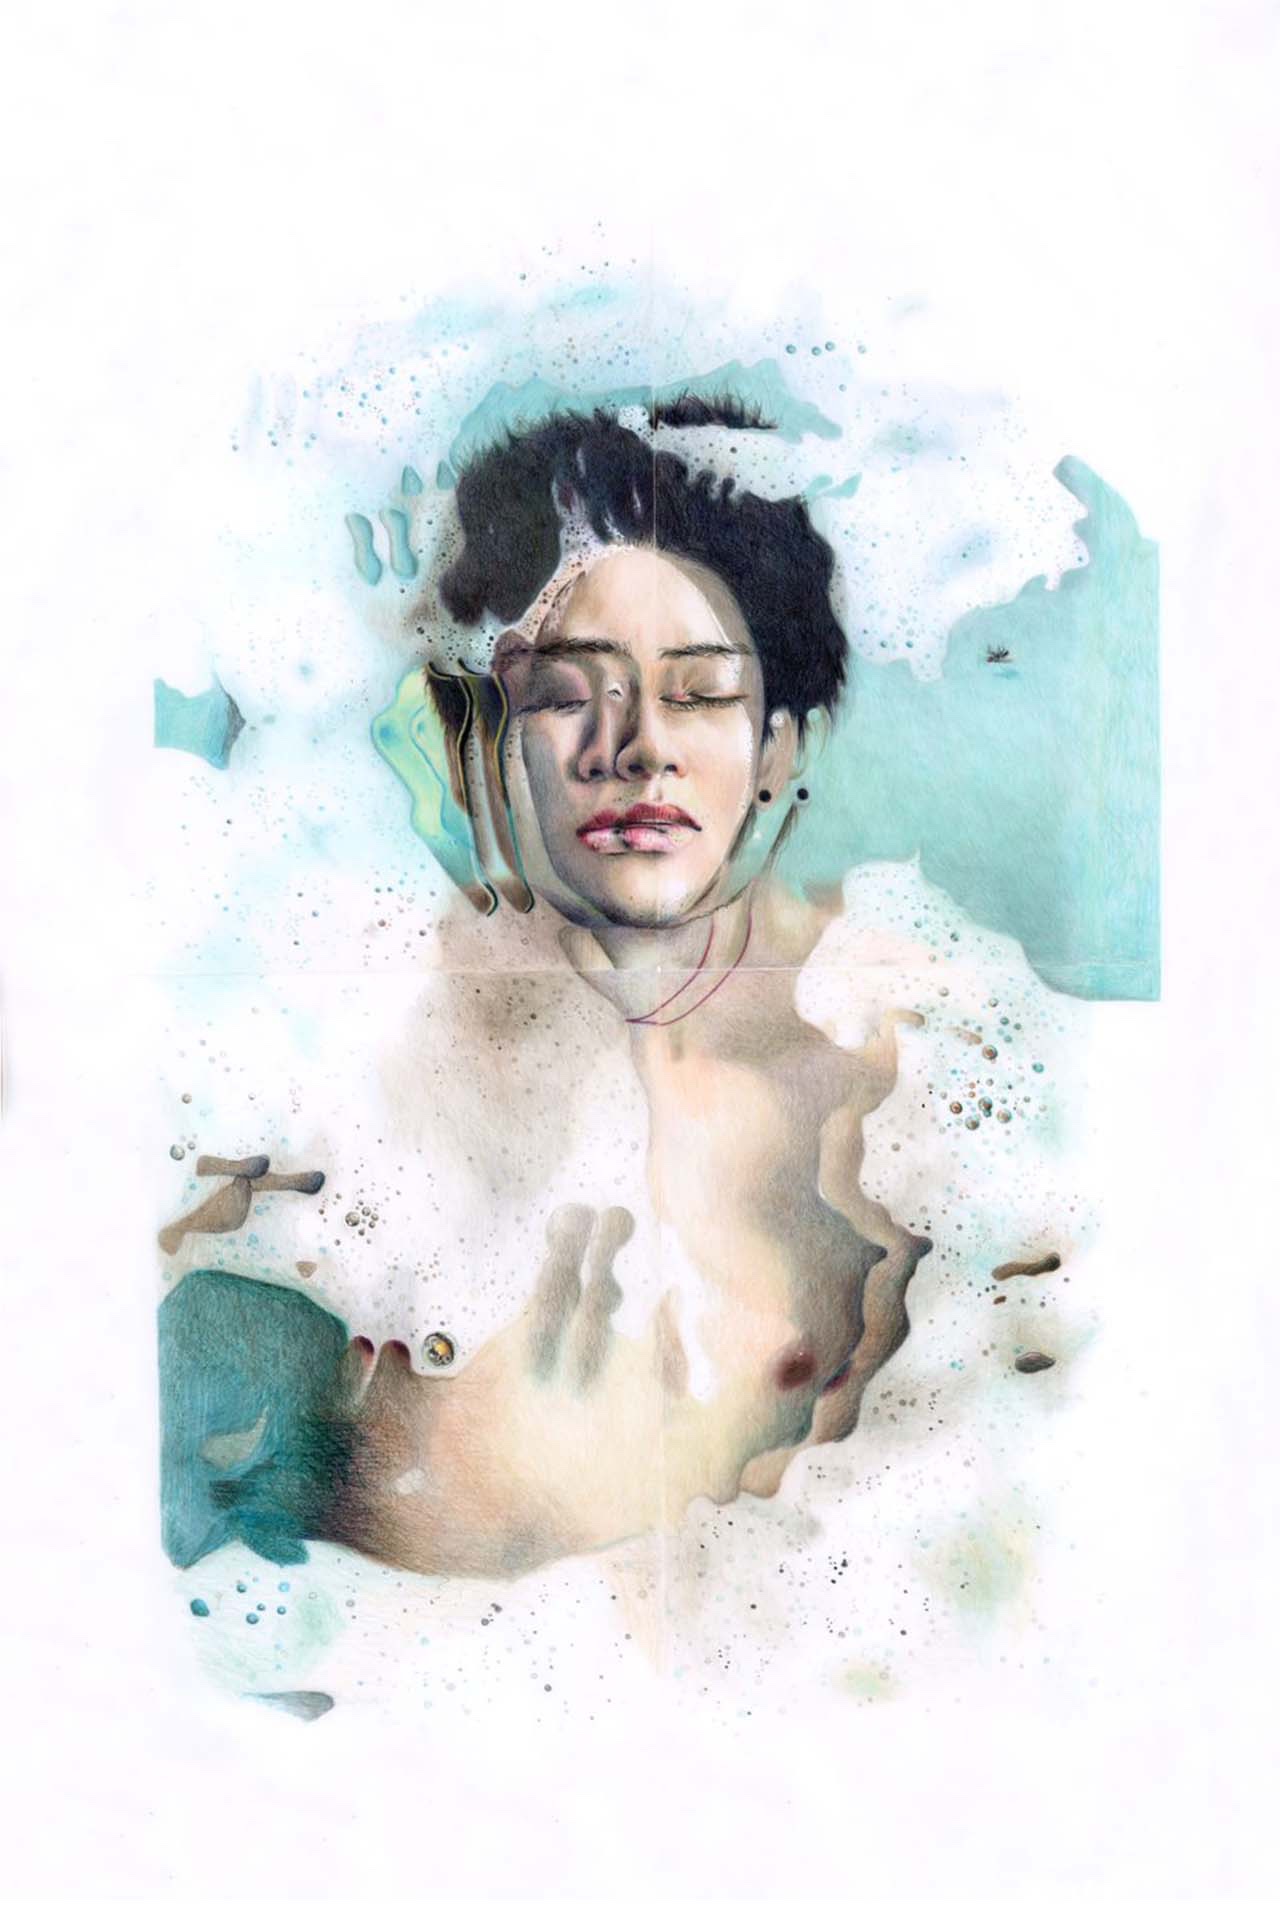 Coloured pencil drawing of a man submerged and bugs in a bubble bath with a digital doubling effect.